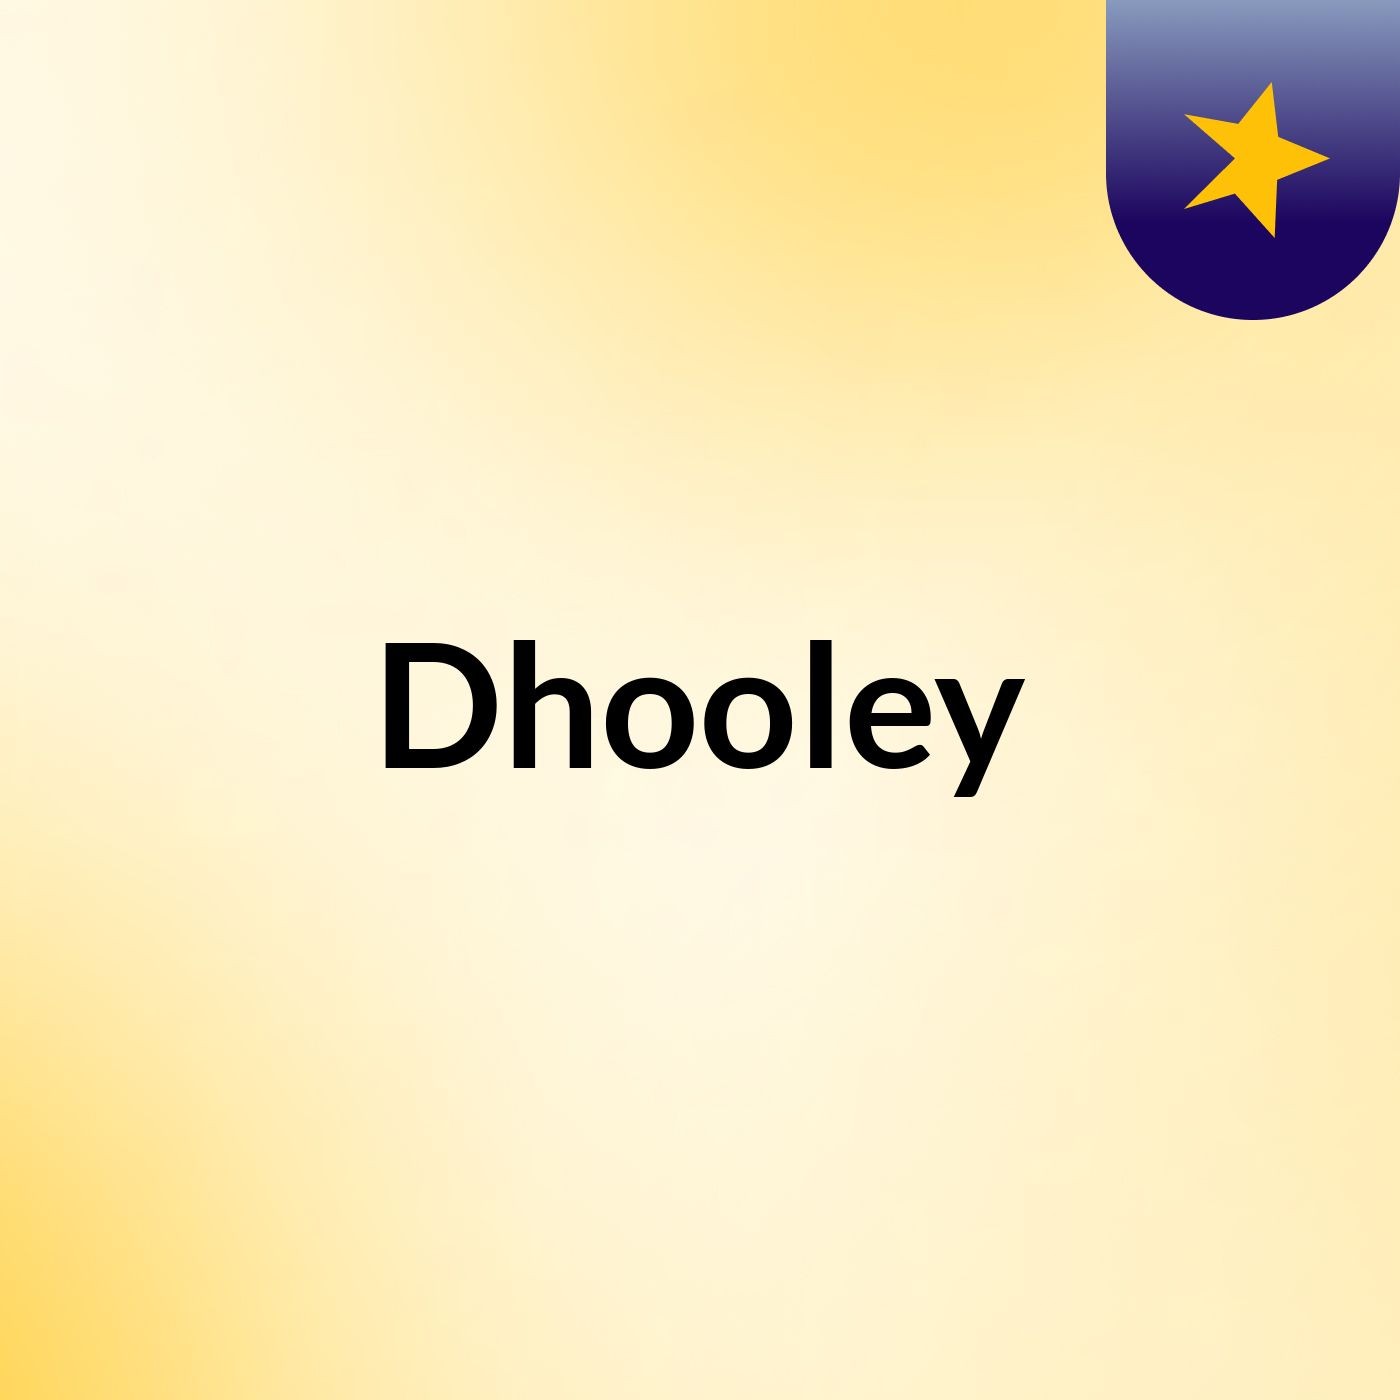 Dhooley